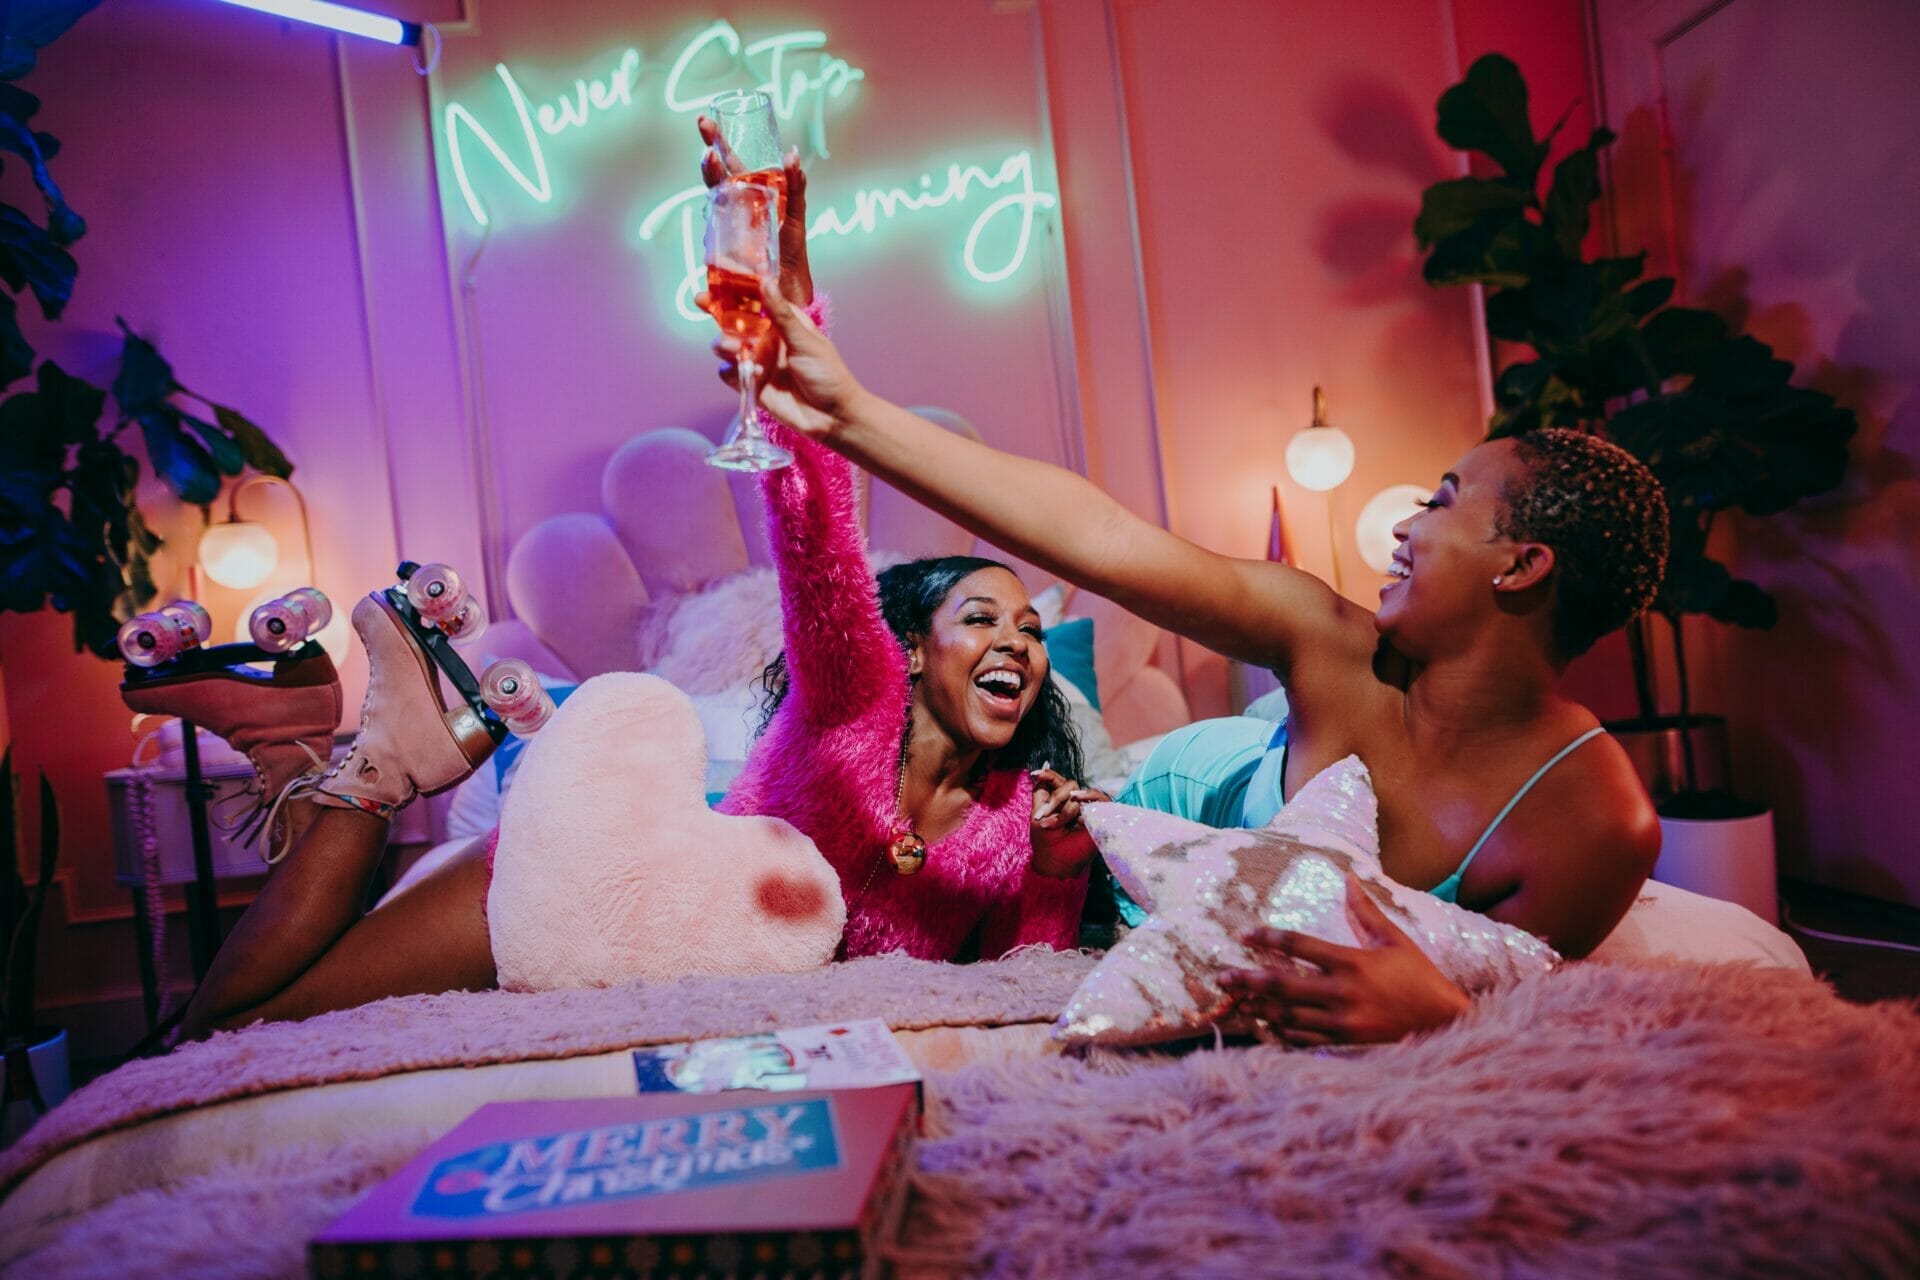 Two sisters, celebrating at an exciting bachelorette party with a red color scheme, joyfully indulging in glasses of wine. Perfect bachelorette party captions for sister moments